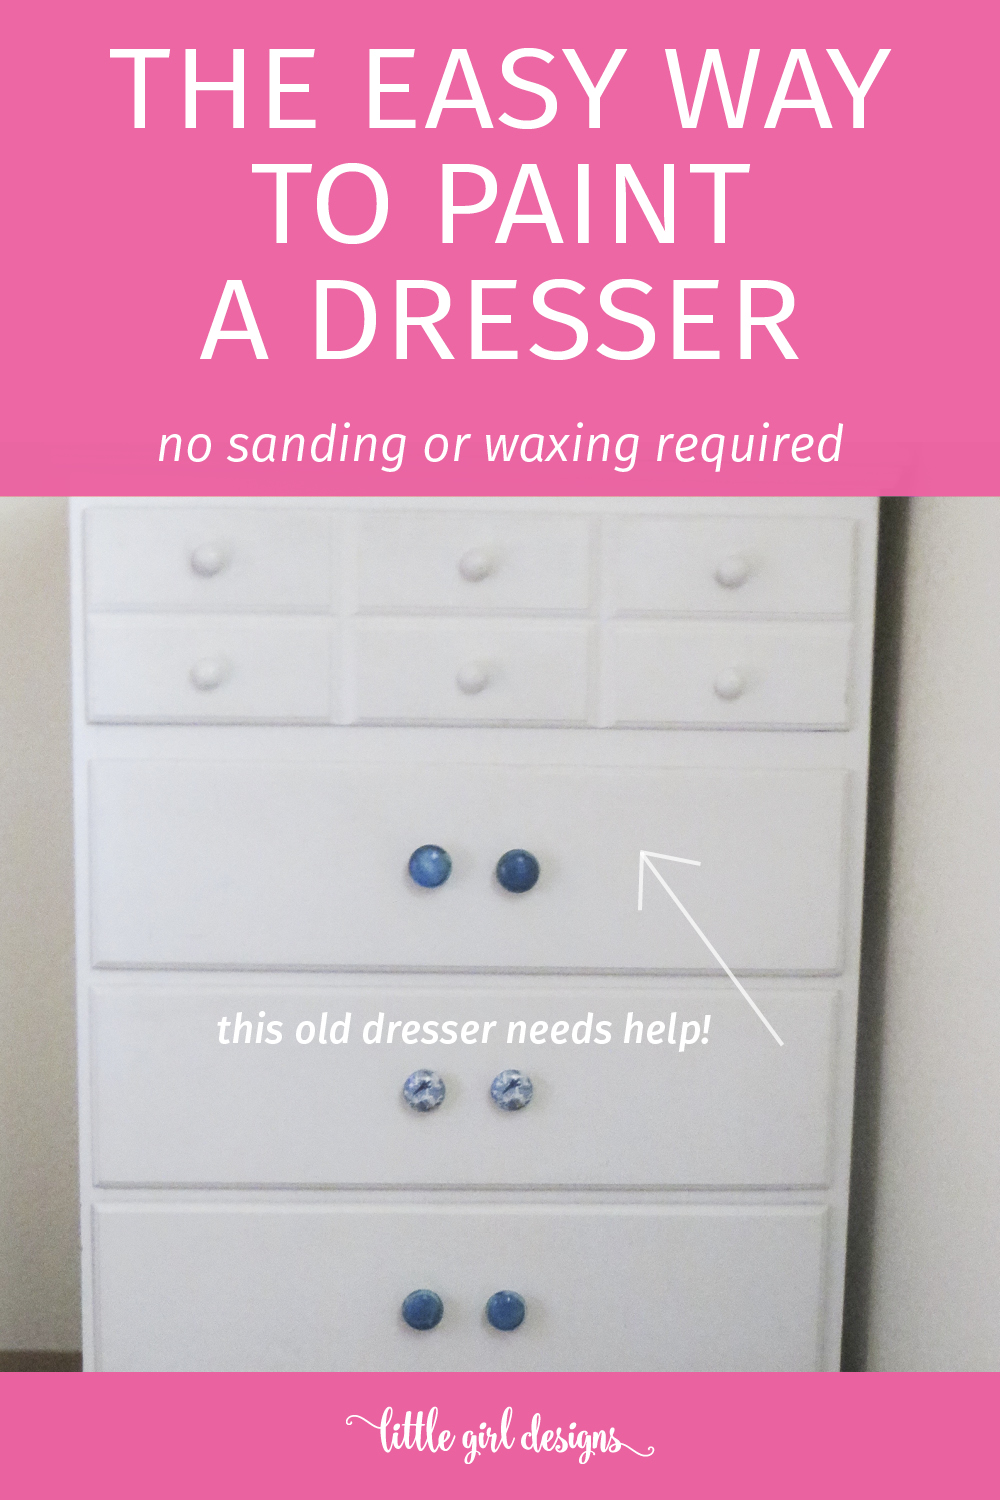 My daughter's dresser needed a serious update but I'm not much of a painter. This post made everything so simple, that I'm going to try it out! I can't believe how nice this updated dresser looks!